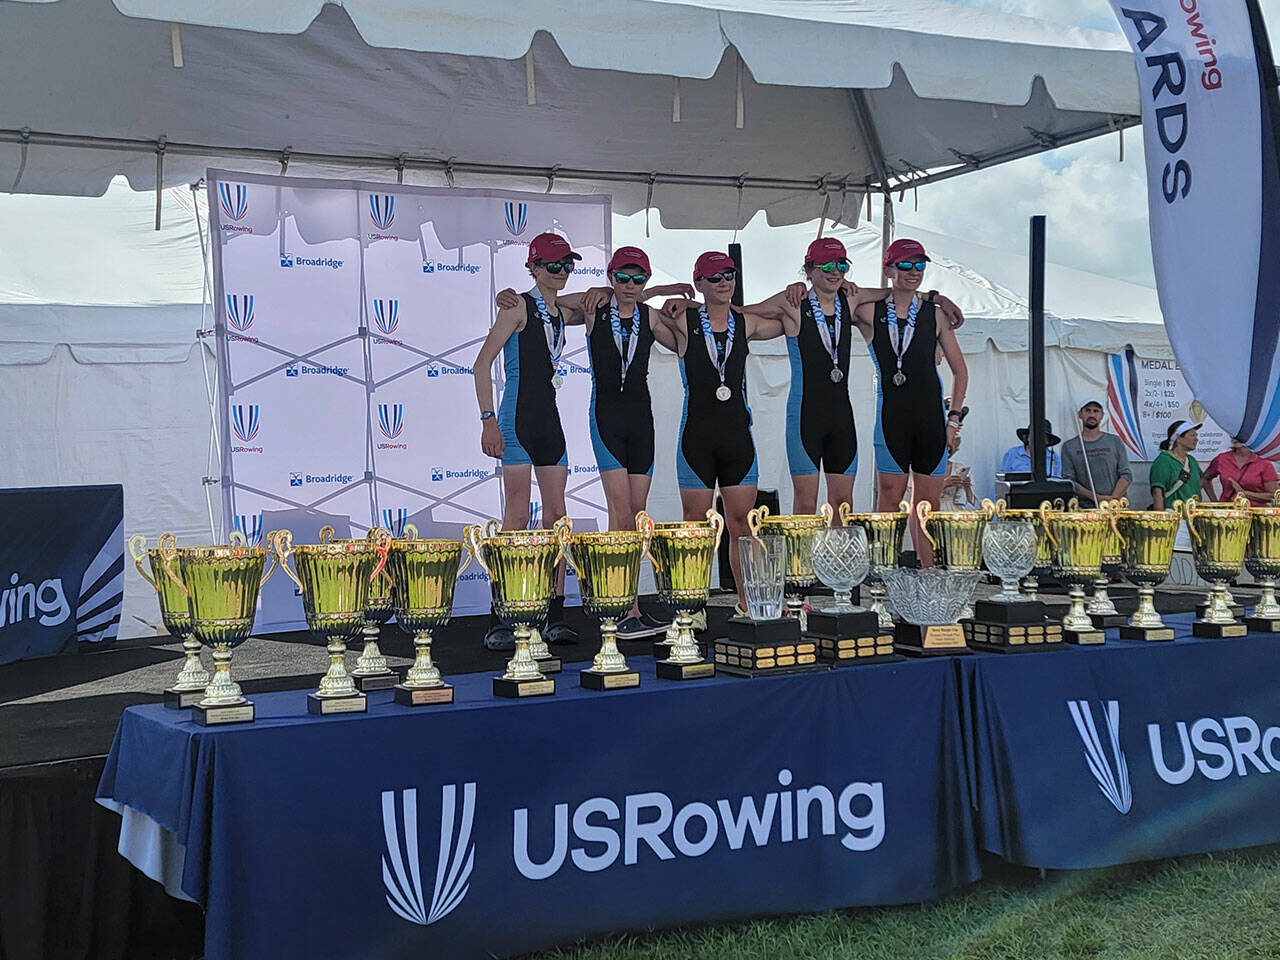 (Photo Courtesy Delany Steele) The National Silver Medalist Men’s U15 4x+ crew. (left to right) Quentin Cherry, coxswain Tyler Davis, Will Parker, Xander Nelson and Henry Cooper